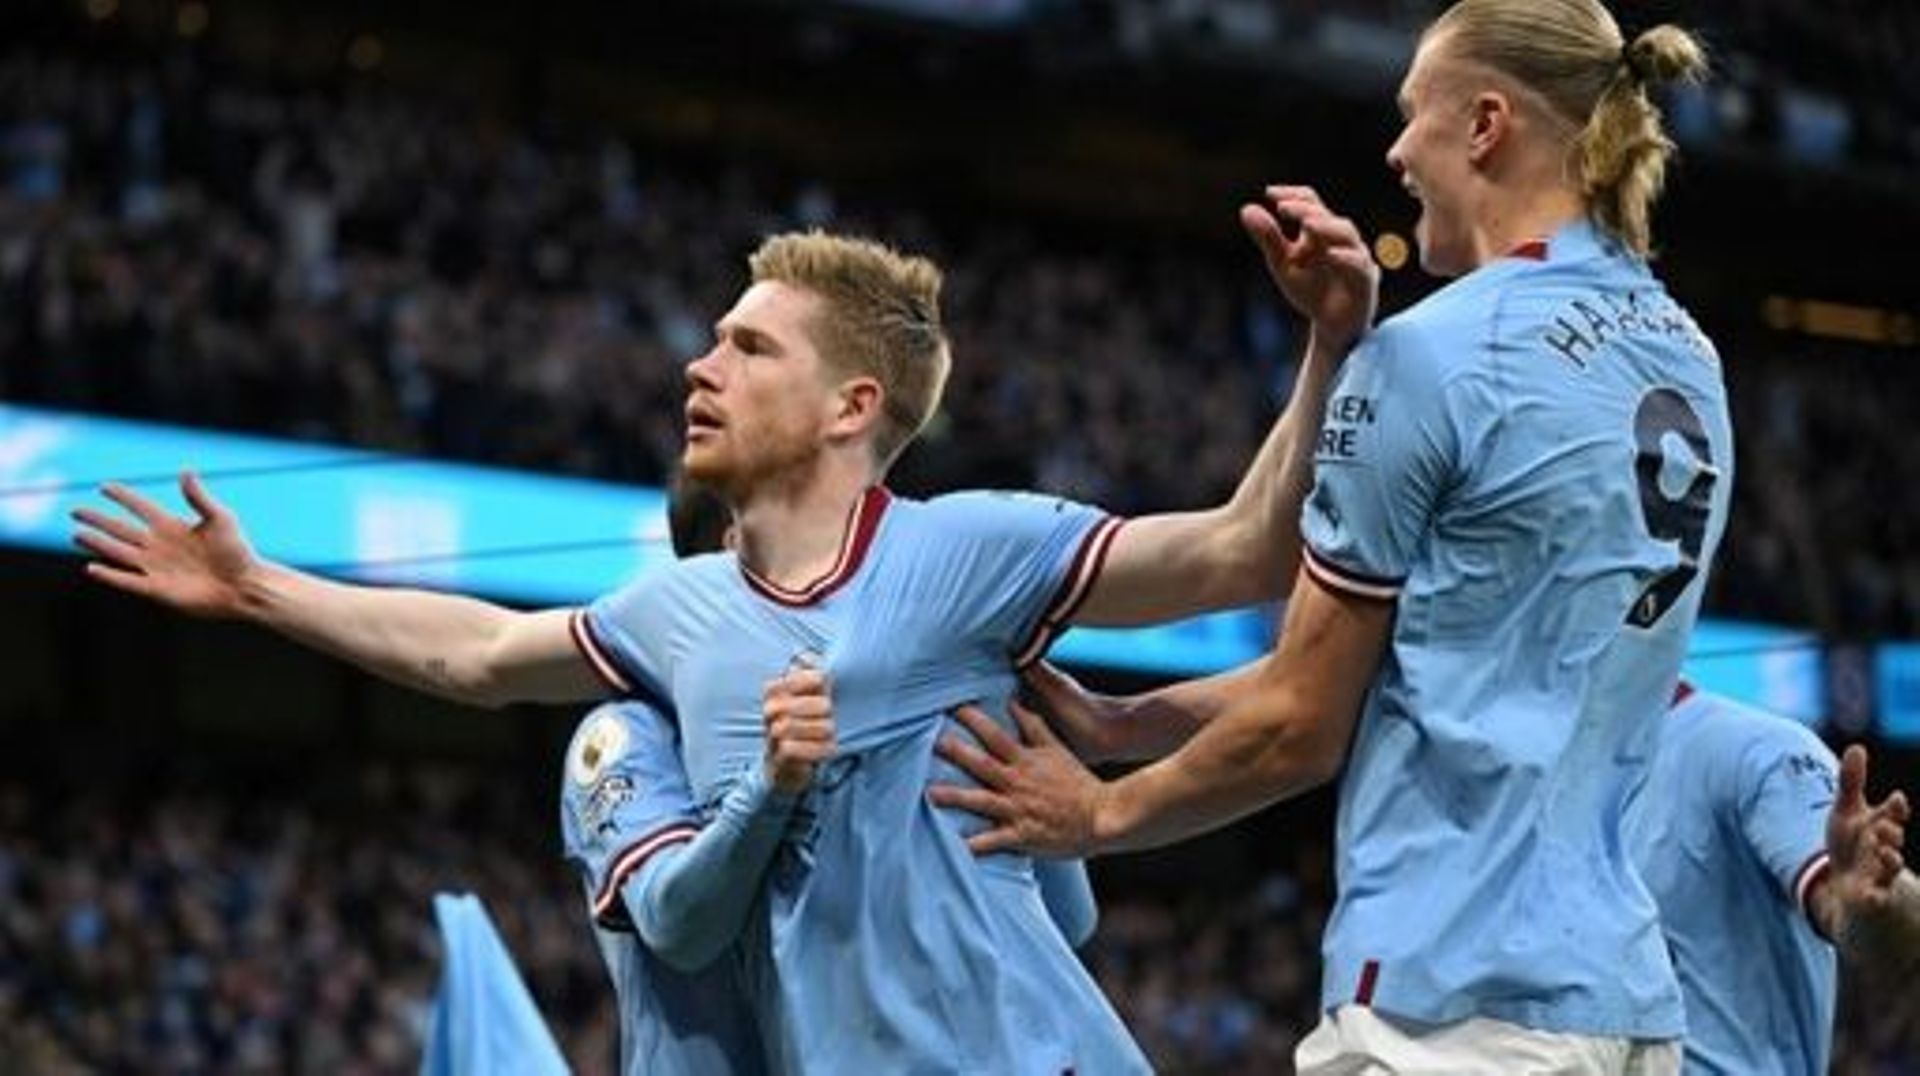 Manchester City's Belgian midfielder Kevin De Bruyne (L) celebrates scoring the opening goal with Manchester City's Norwegian striker Erling Haaland (R) during the English Premier League football match between Manchester City and Arsenal at the Etihad Sta